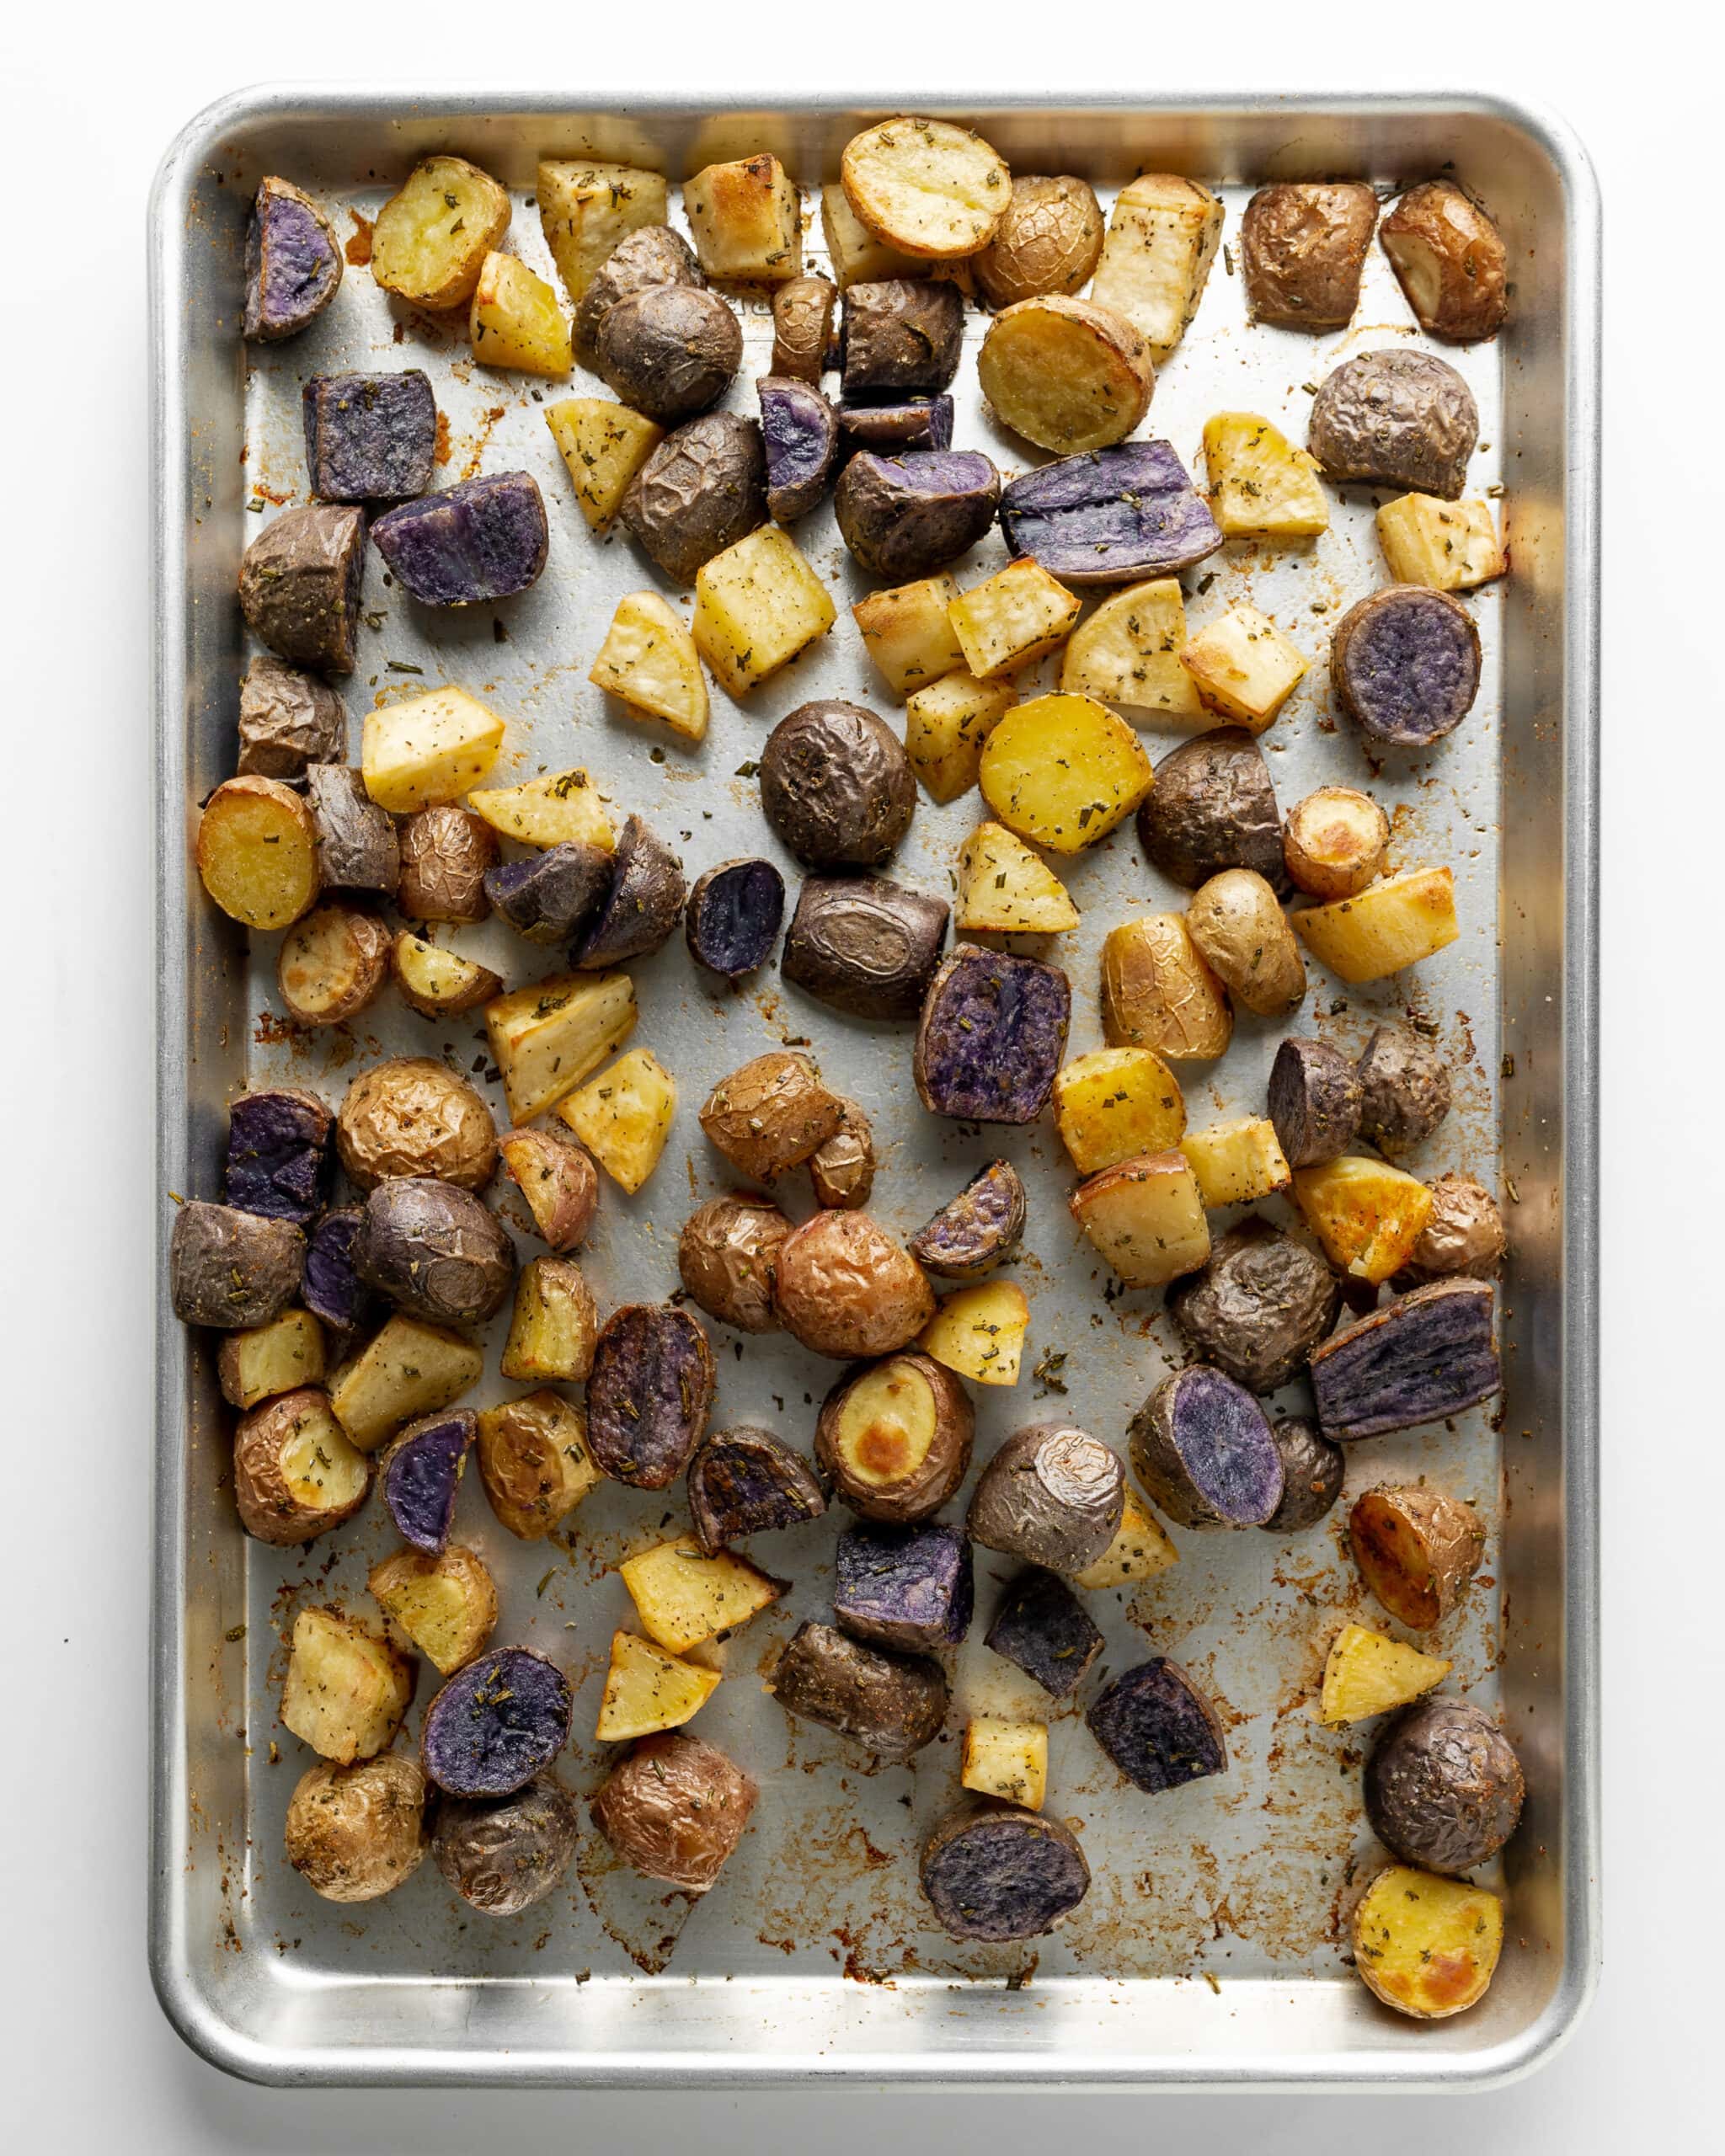 A large baking sheet with roasted rainbow potatoes out of the oven.